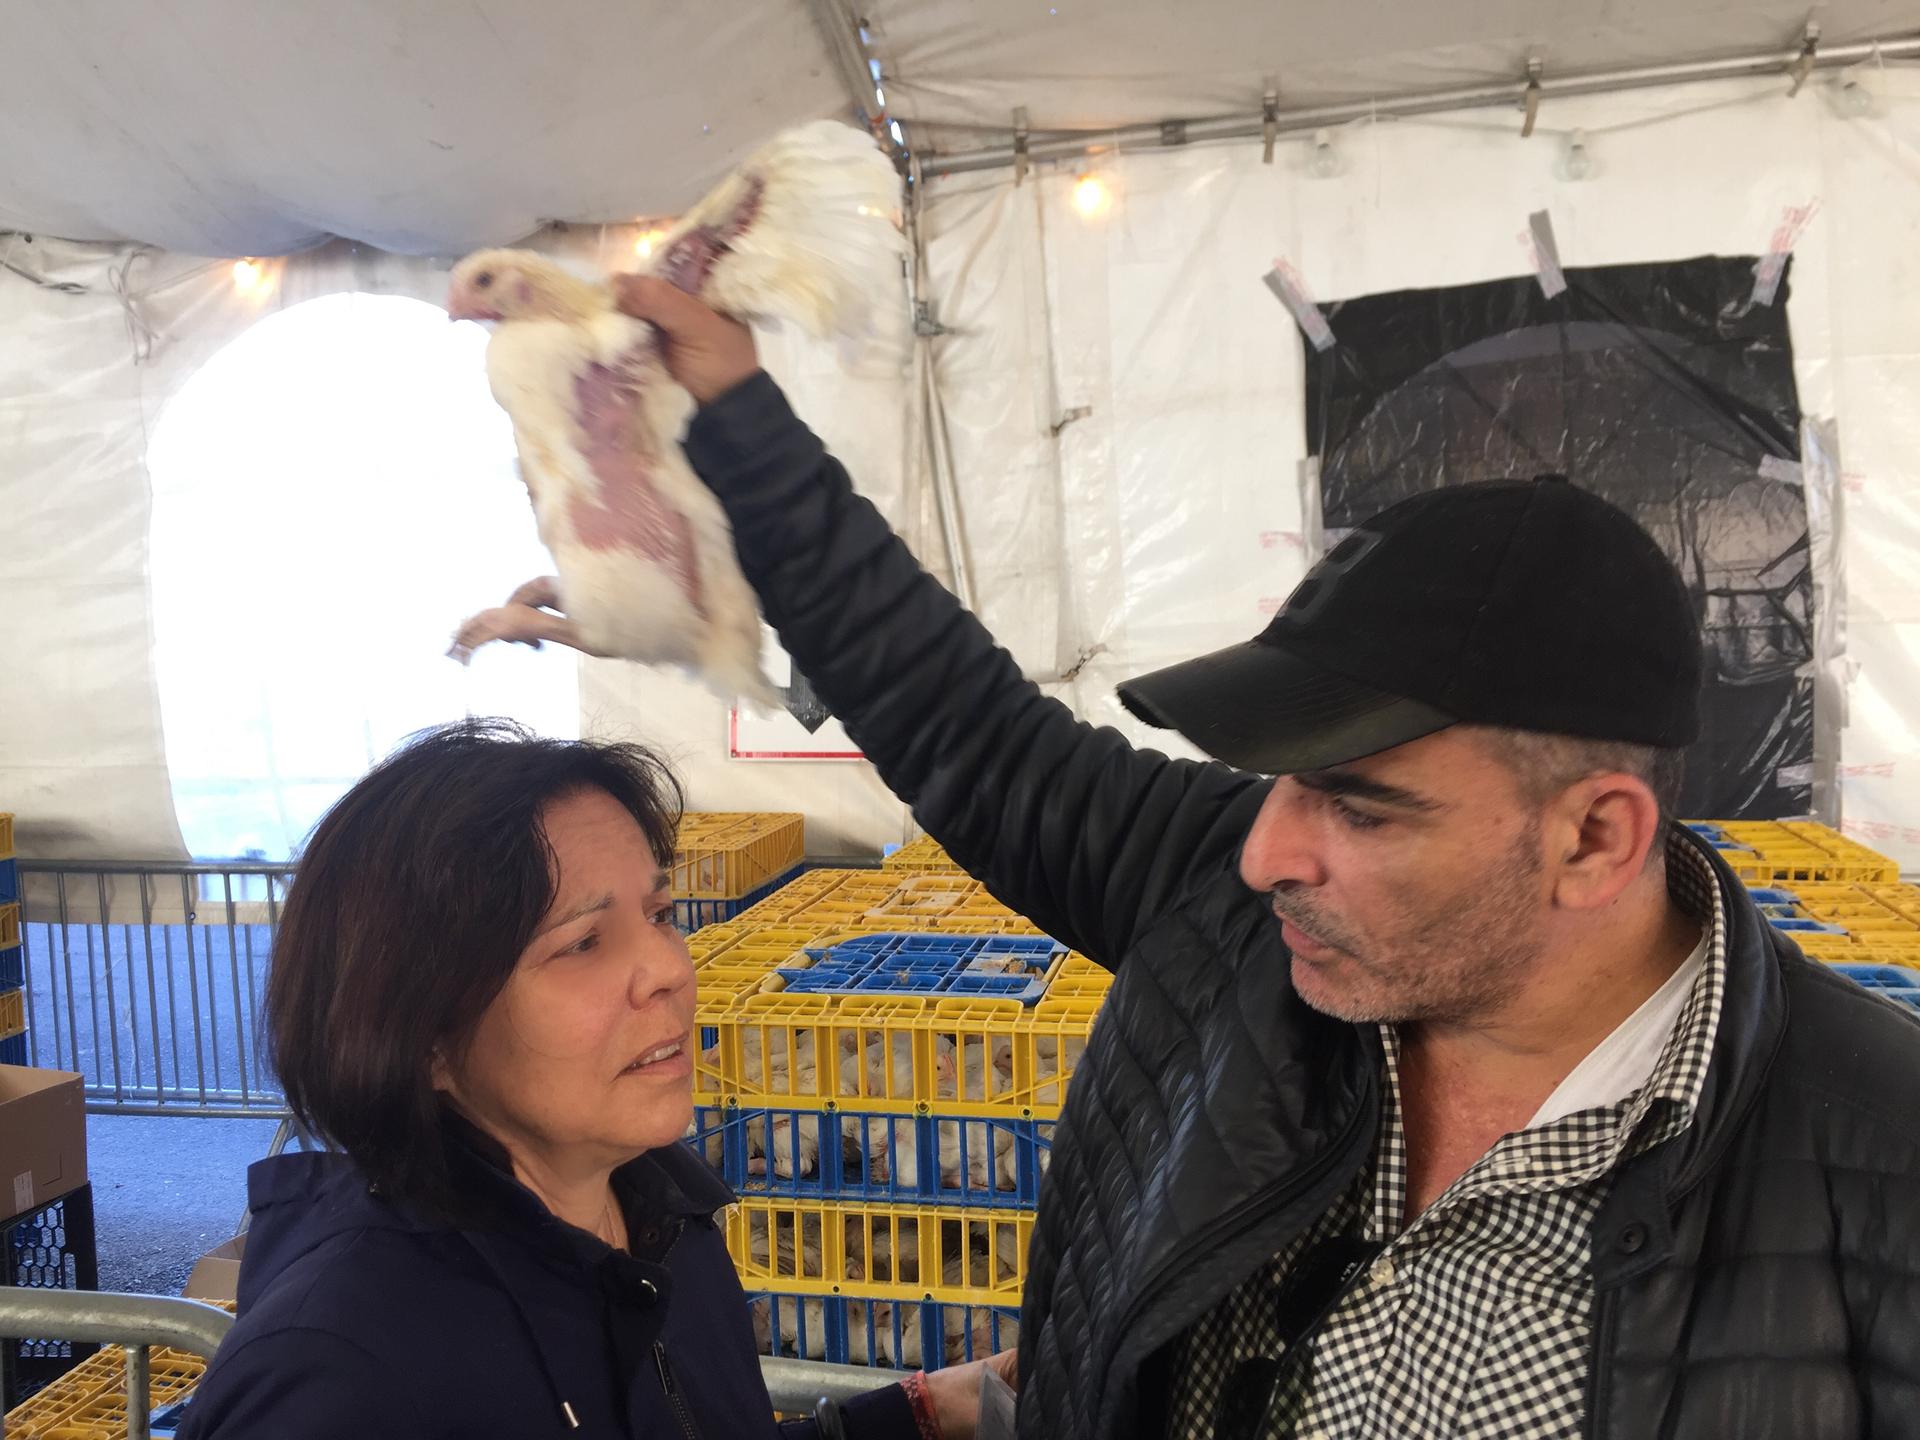 My mother, Barbara Rosenthal, gets some help with the Kaparot ritual. An Israeli man offers to swing the chicken over her while she intones the prayer.